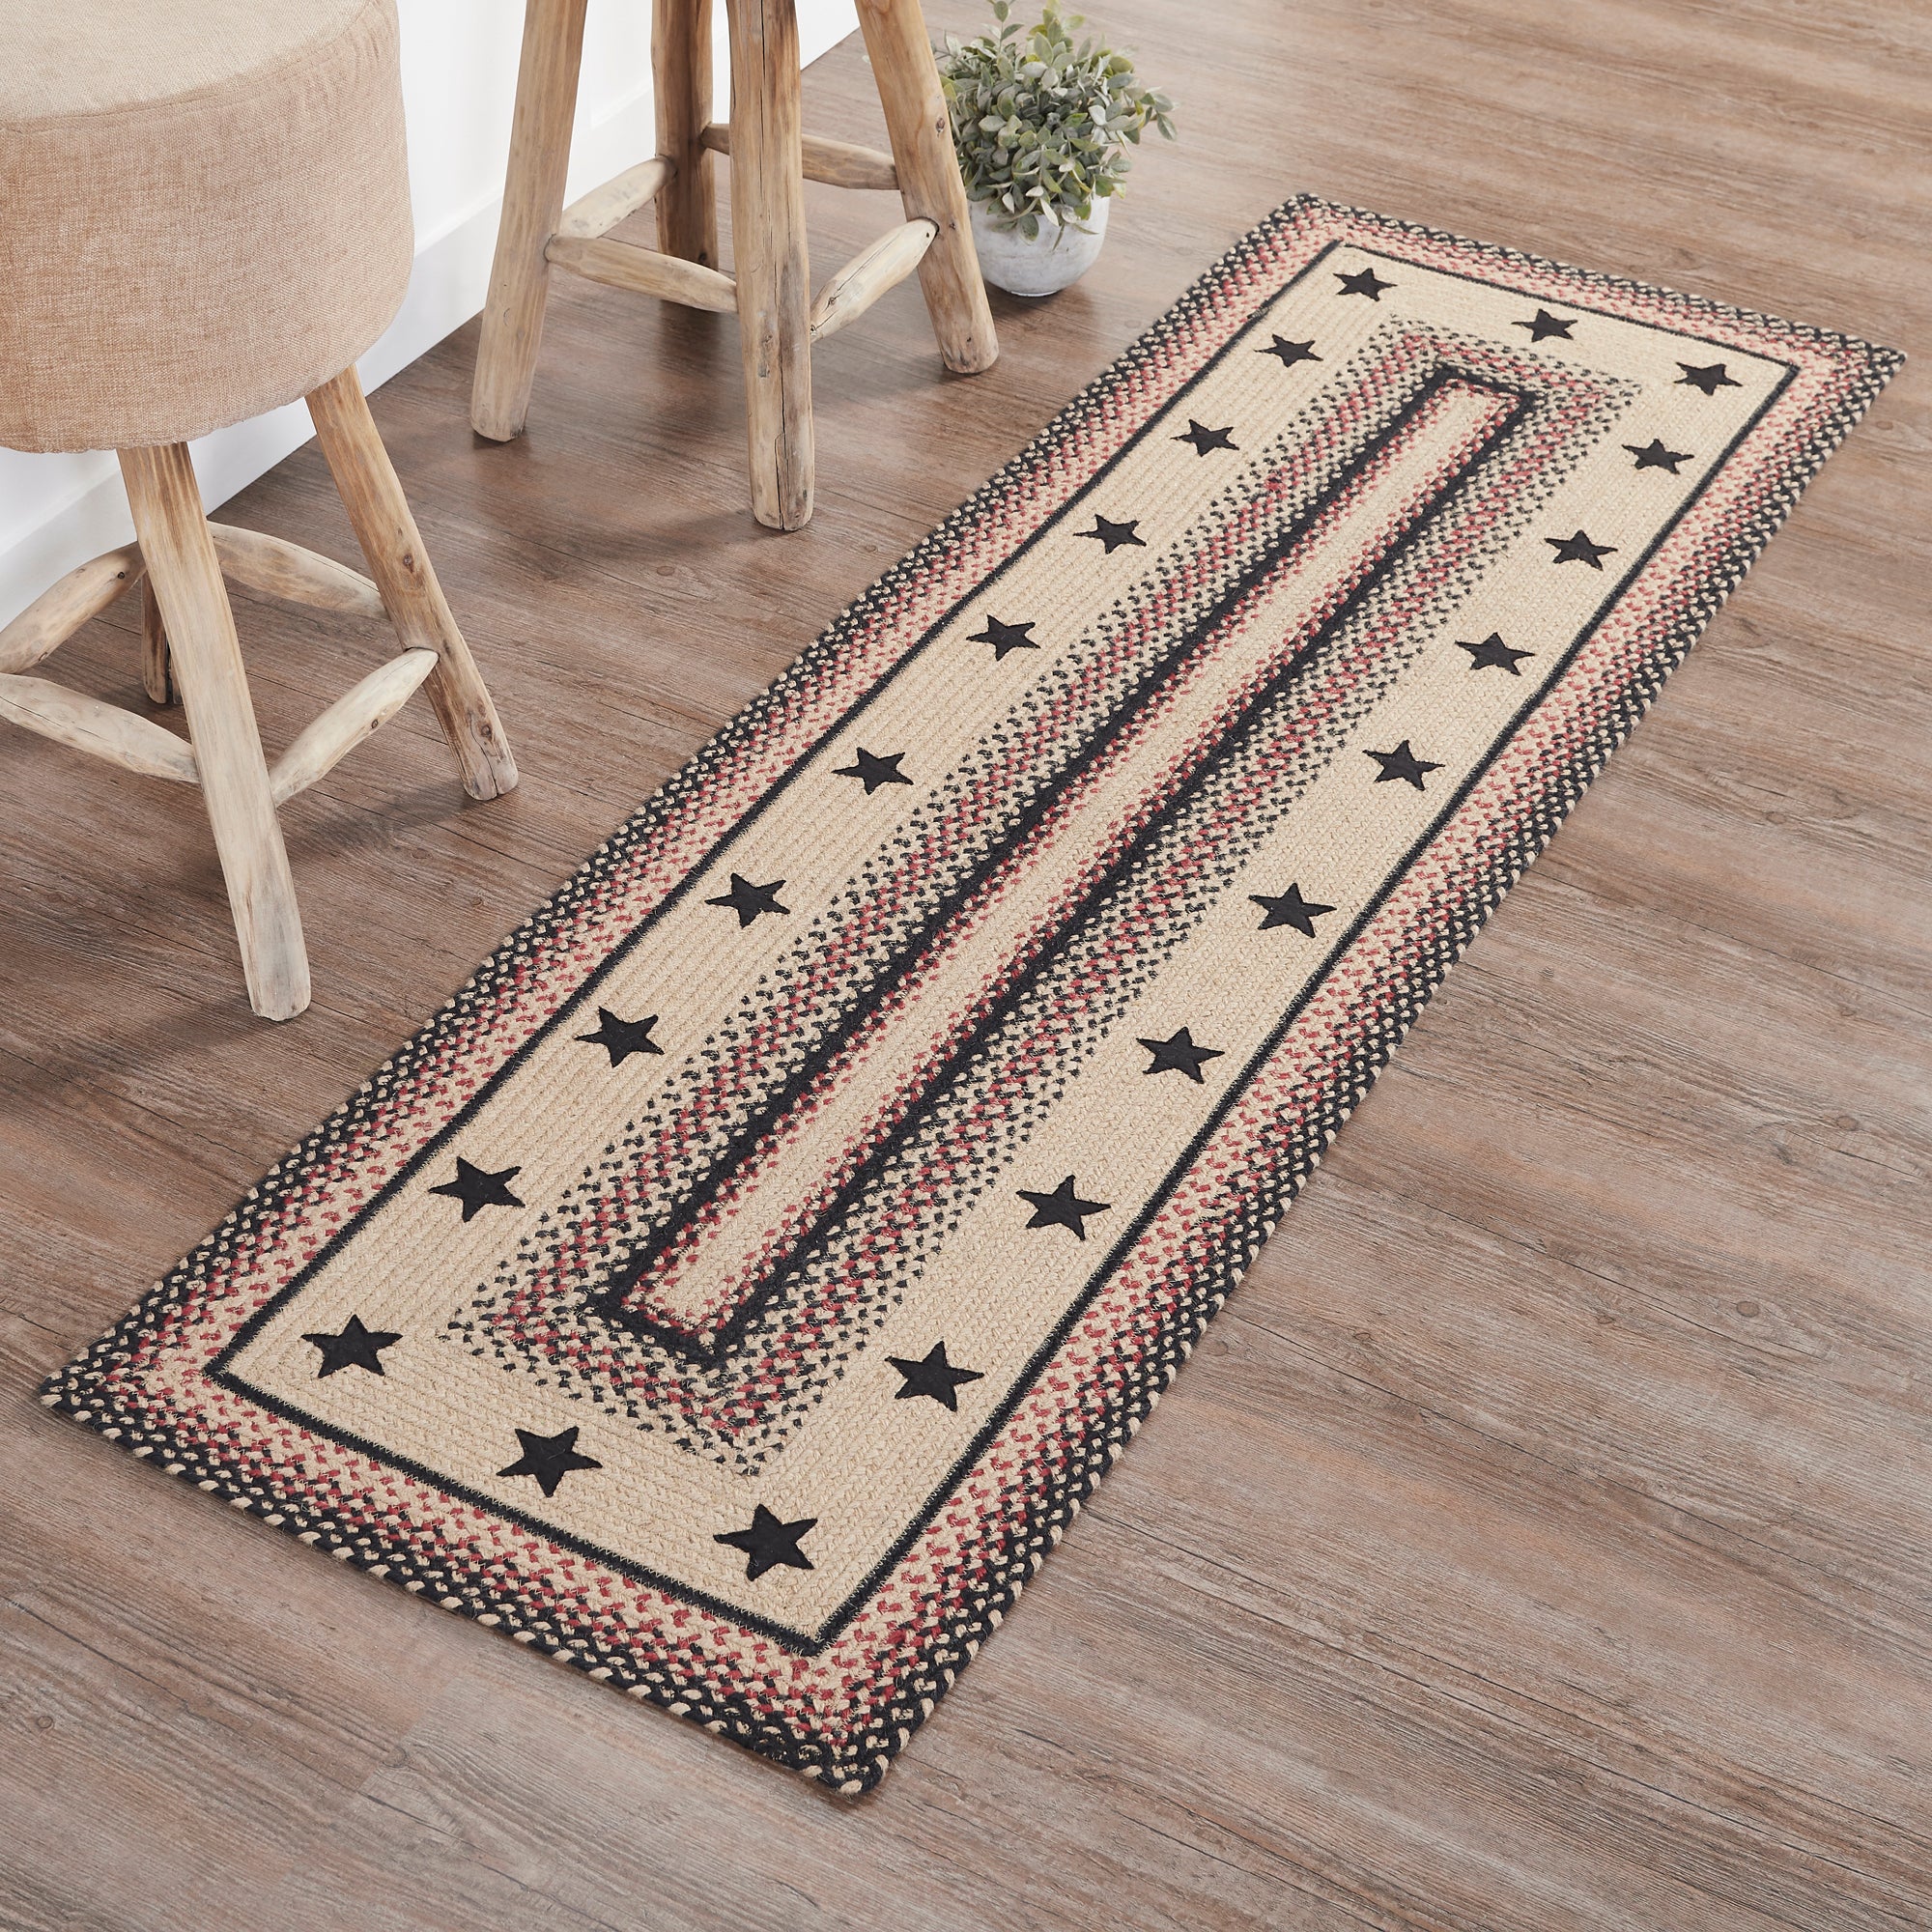 Can Runner Rugs Enhance Your Rooms?